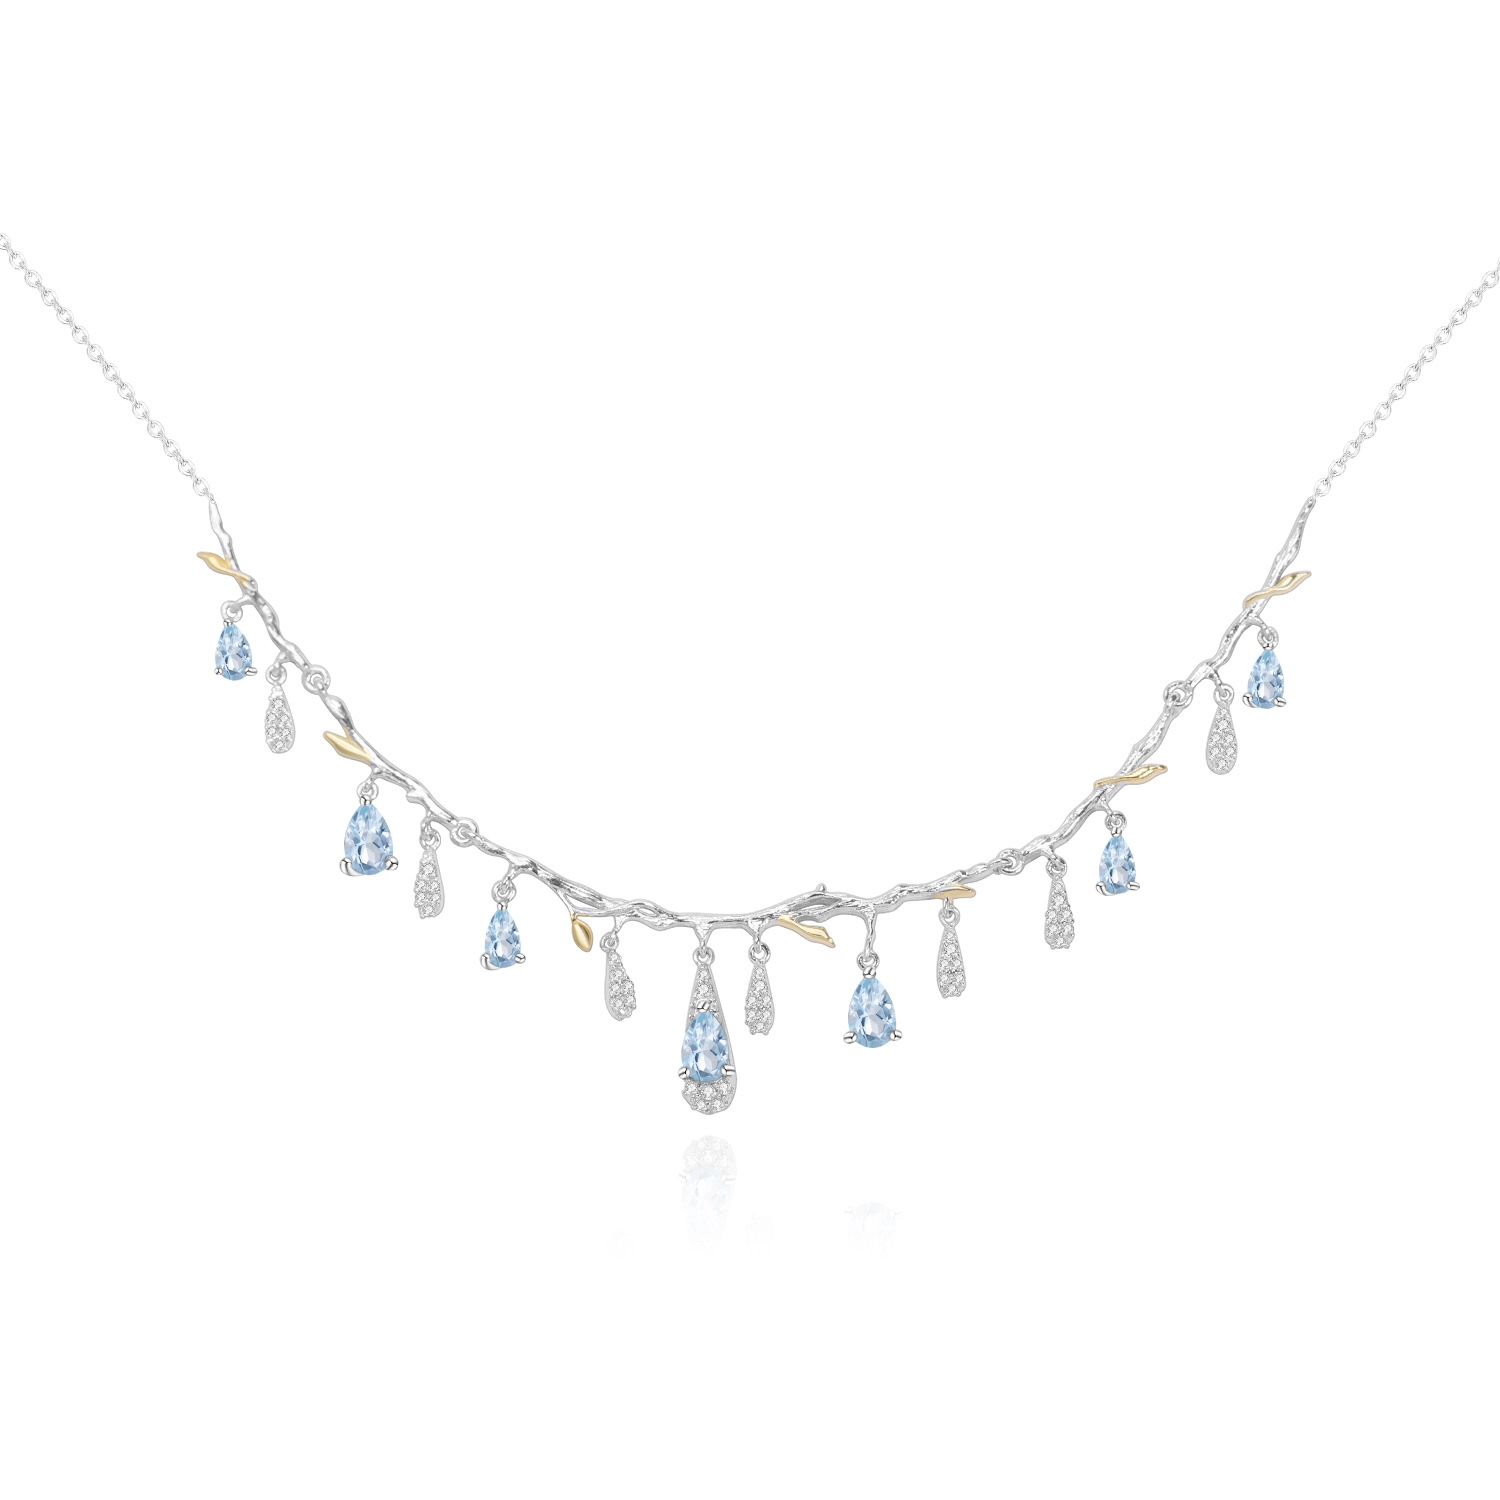 Delicate silver sterling necklace with blue topaz birthstone, gold plated 1